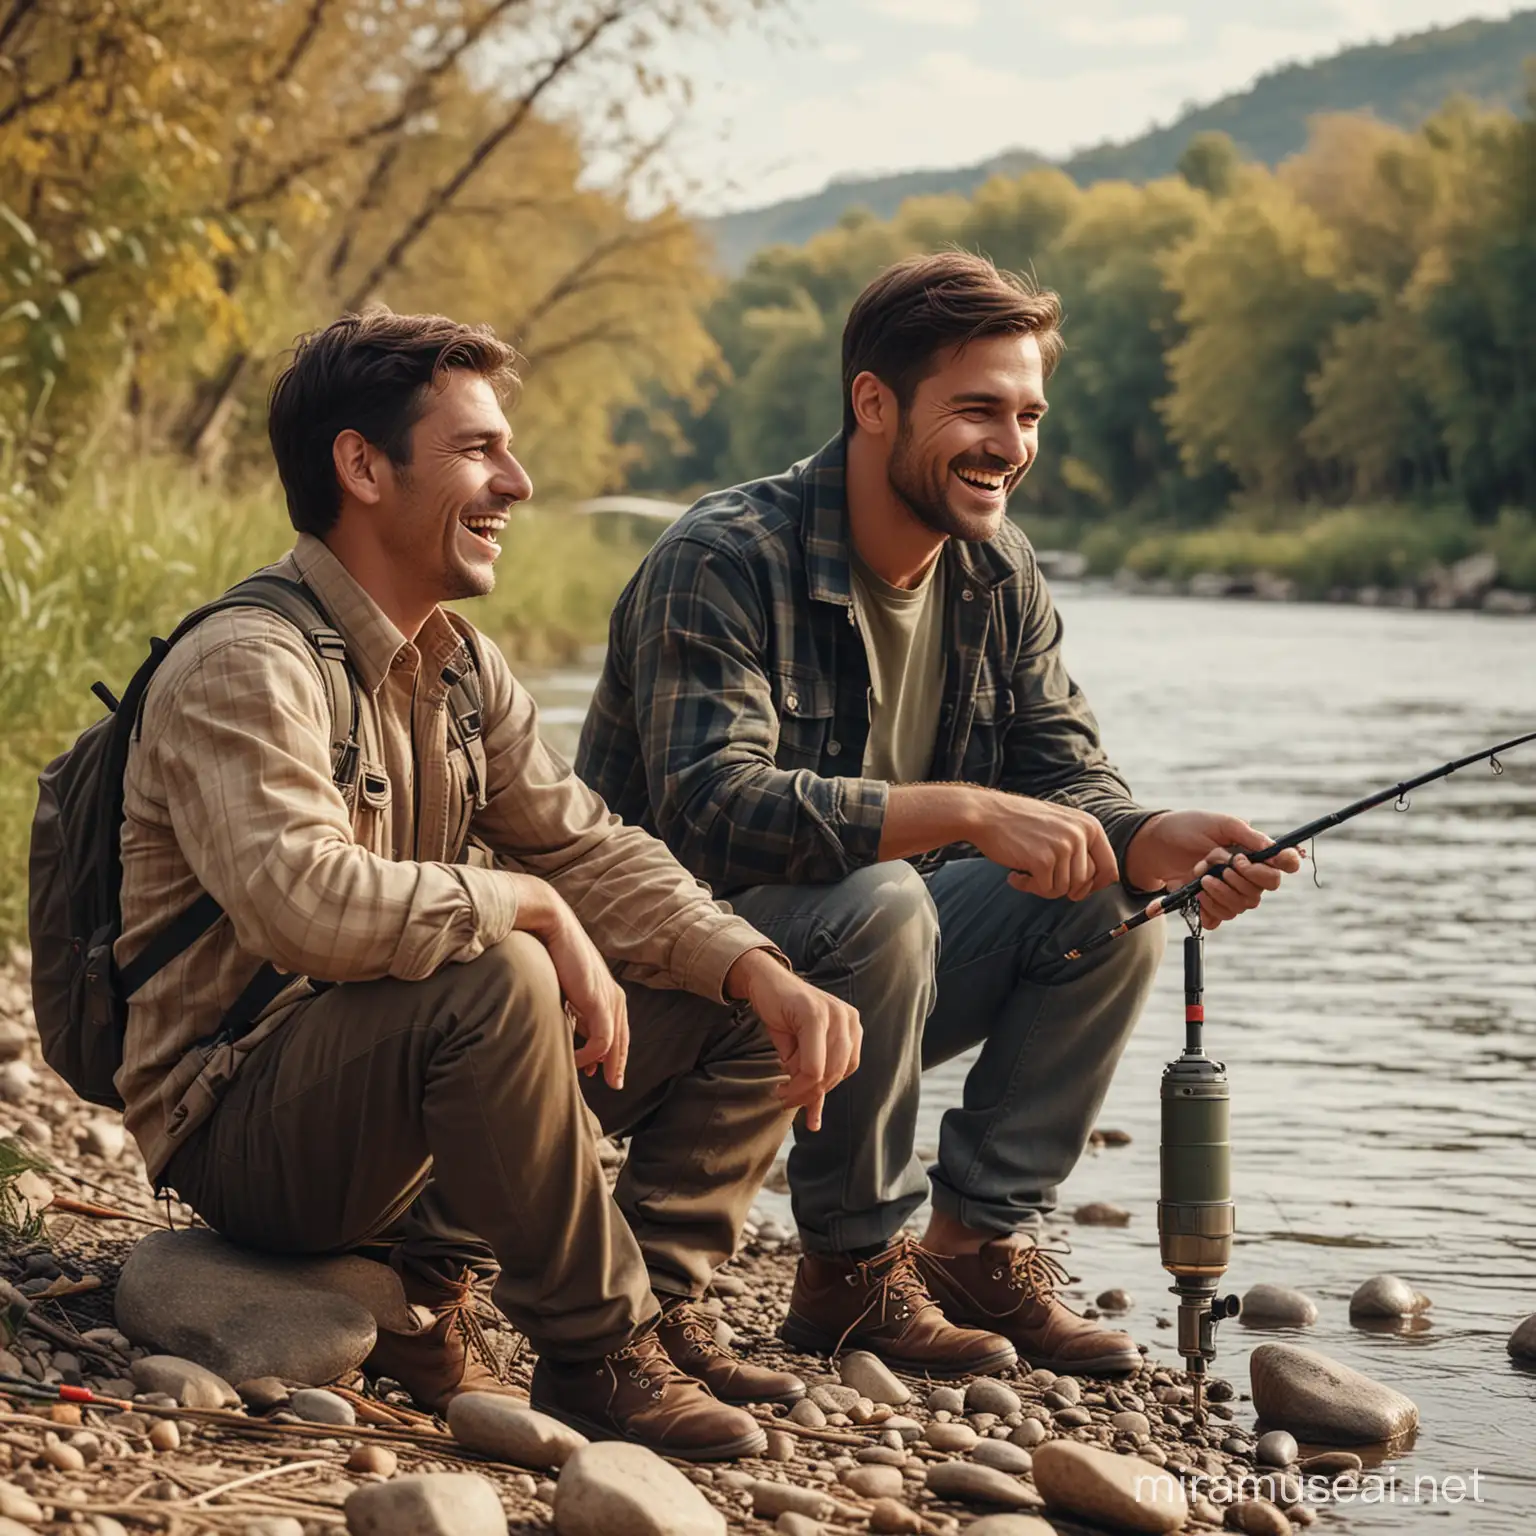 Father and son are laughing together, very handsome, fishing together on river bank, best quality imagine, best quality photo, 8k, high definition photo, detailed faces.